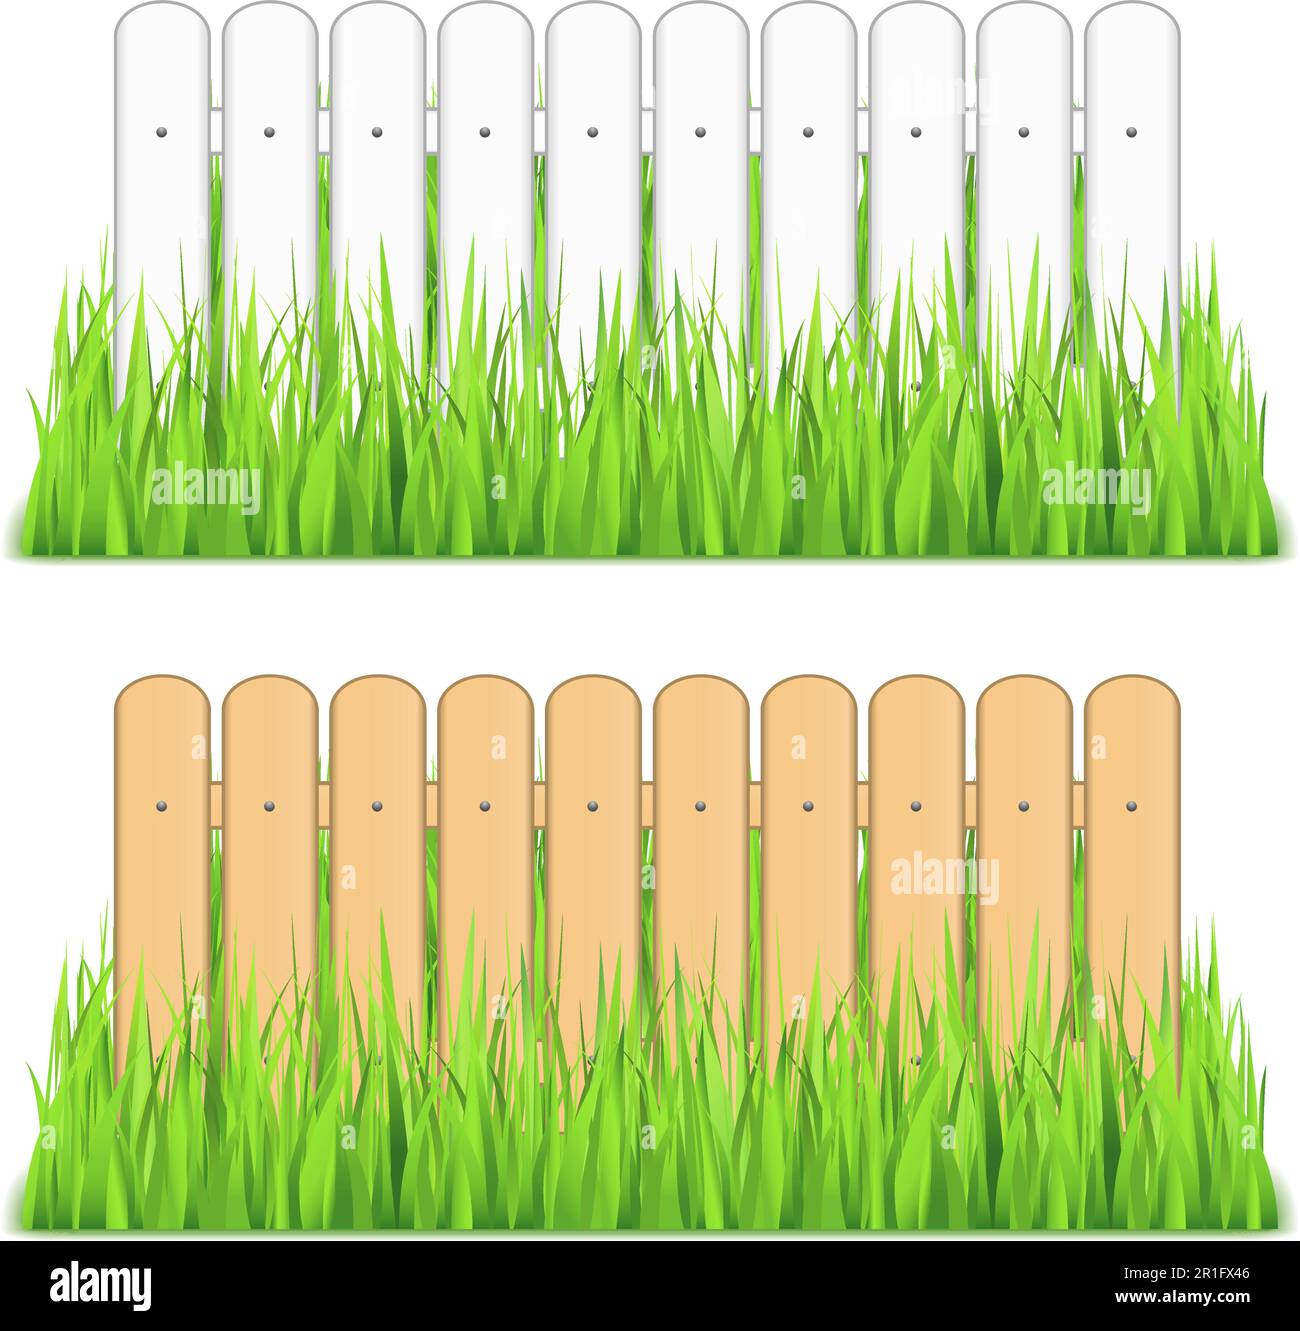 White and brown fences in grass, vector eps10 illustration Stock Vector